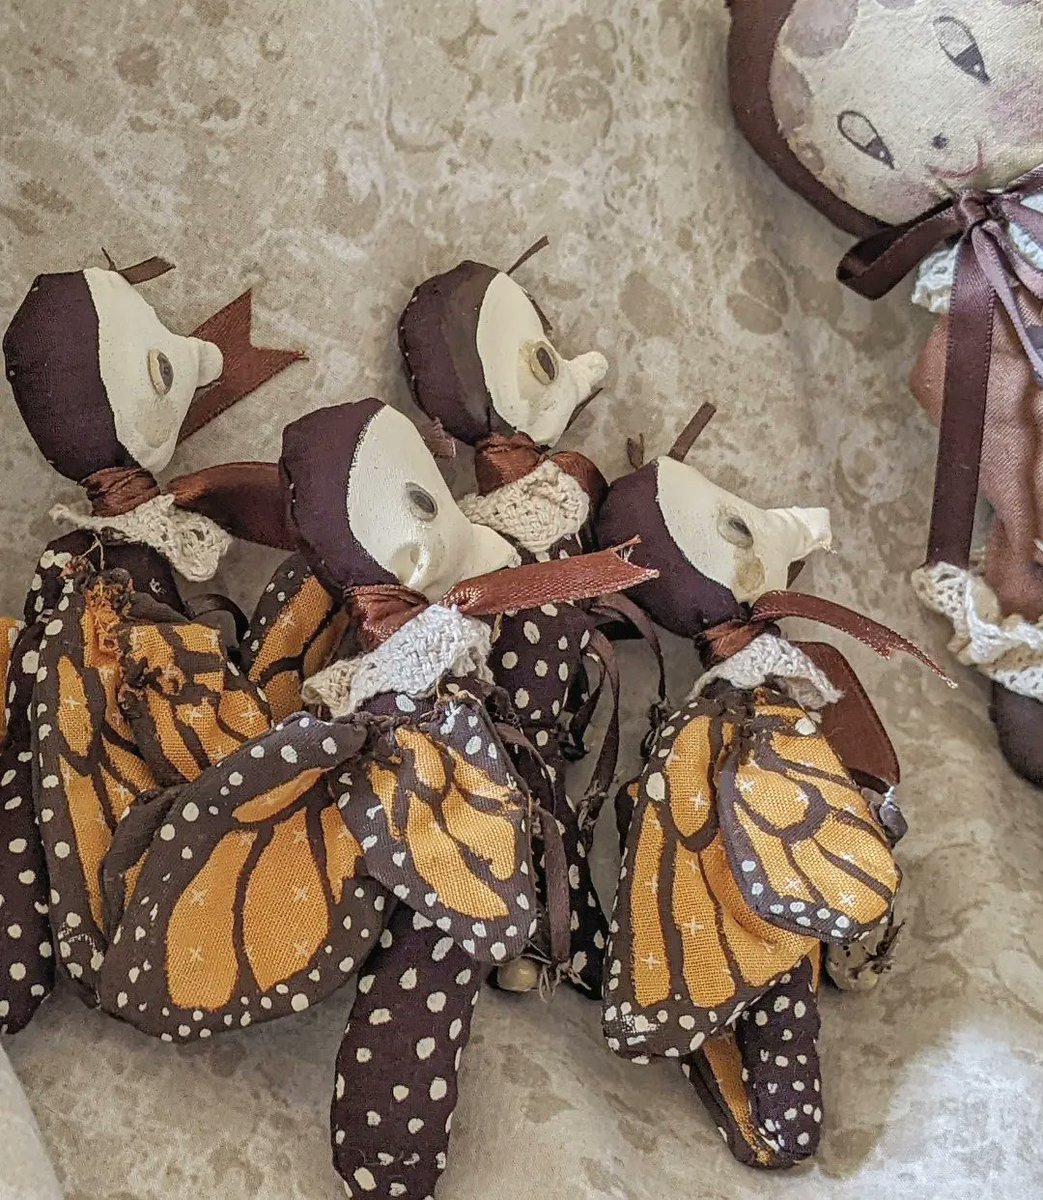 Small butterfly handsewn clothdolls for my shop,
I made four, 
if you are interested the link to my shop is in my bio .
Thank you.
 
2022 
Sommer.